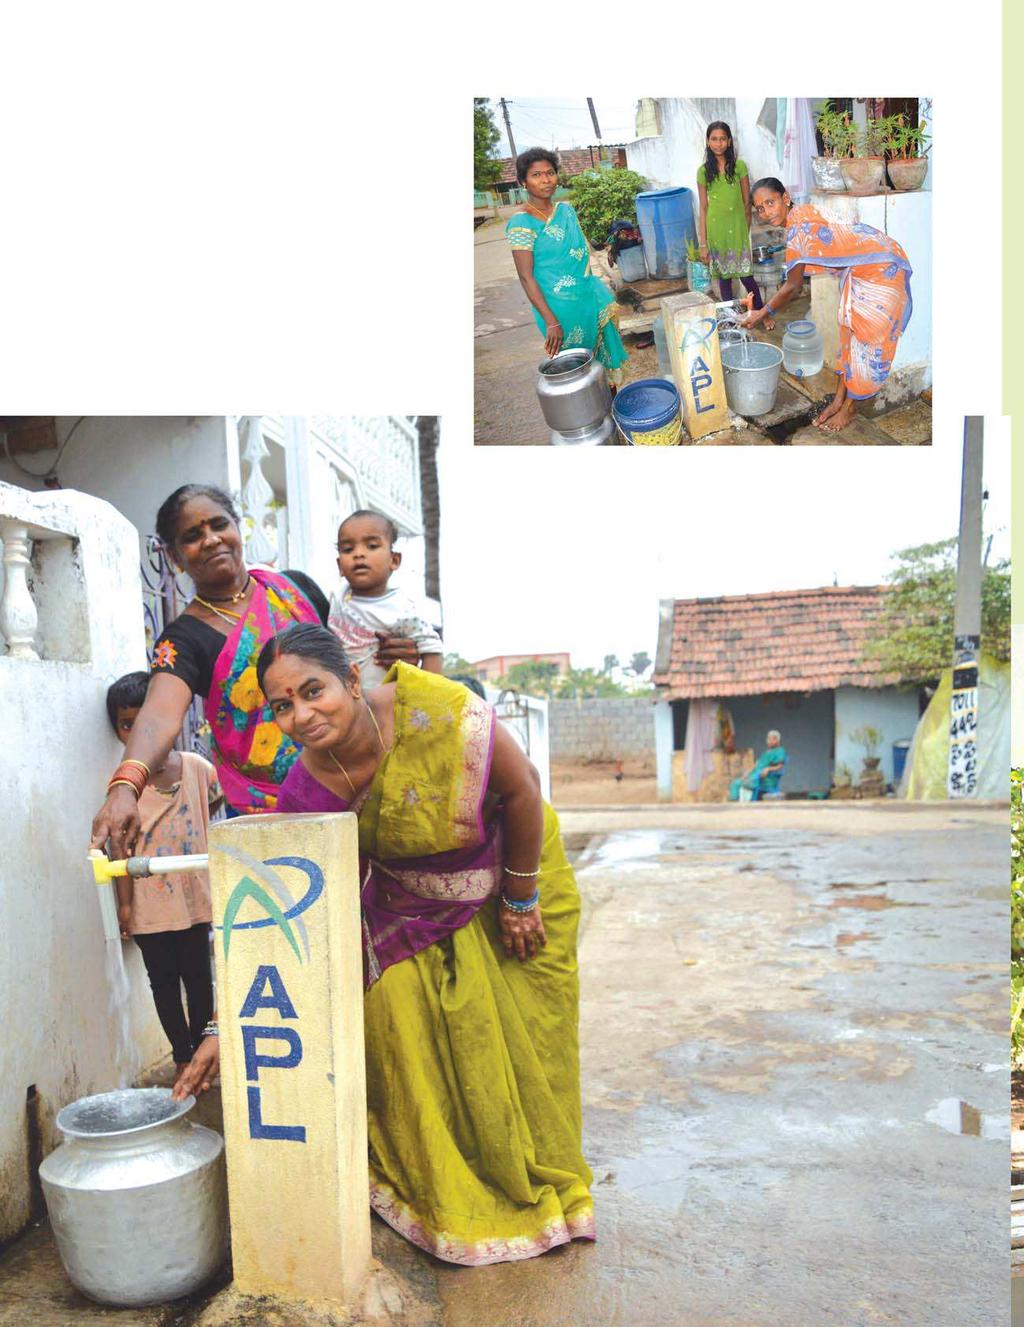 Water through pipelines Our villagers suffered due to shortage of drinking water. Aurobindo Pharma is helping us with pipelines that supply purified drinking water through taps.